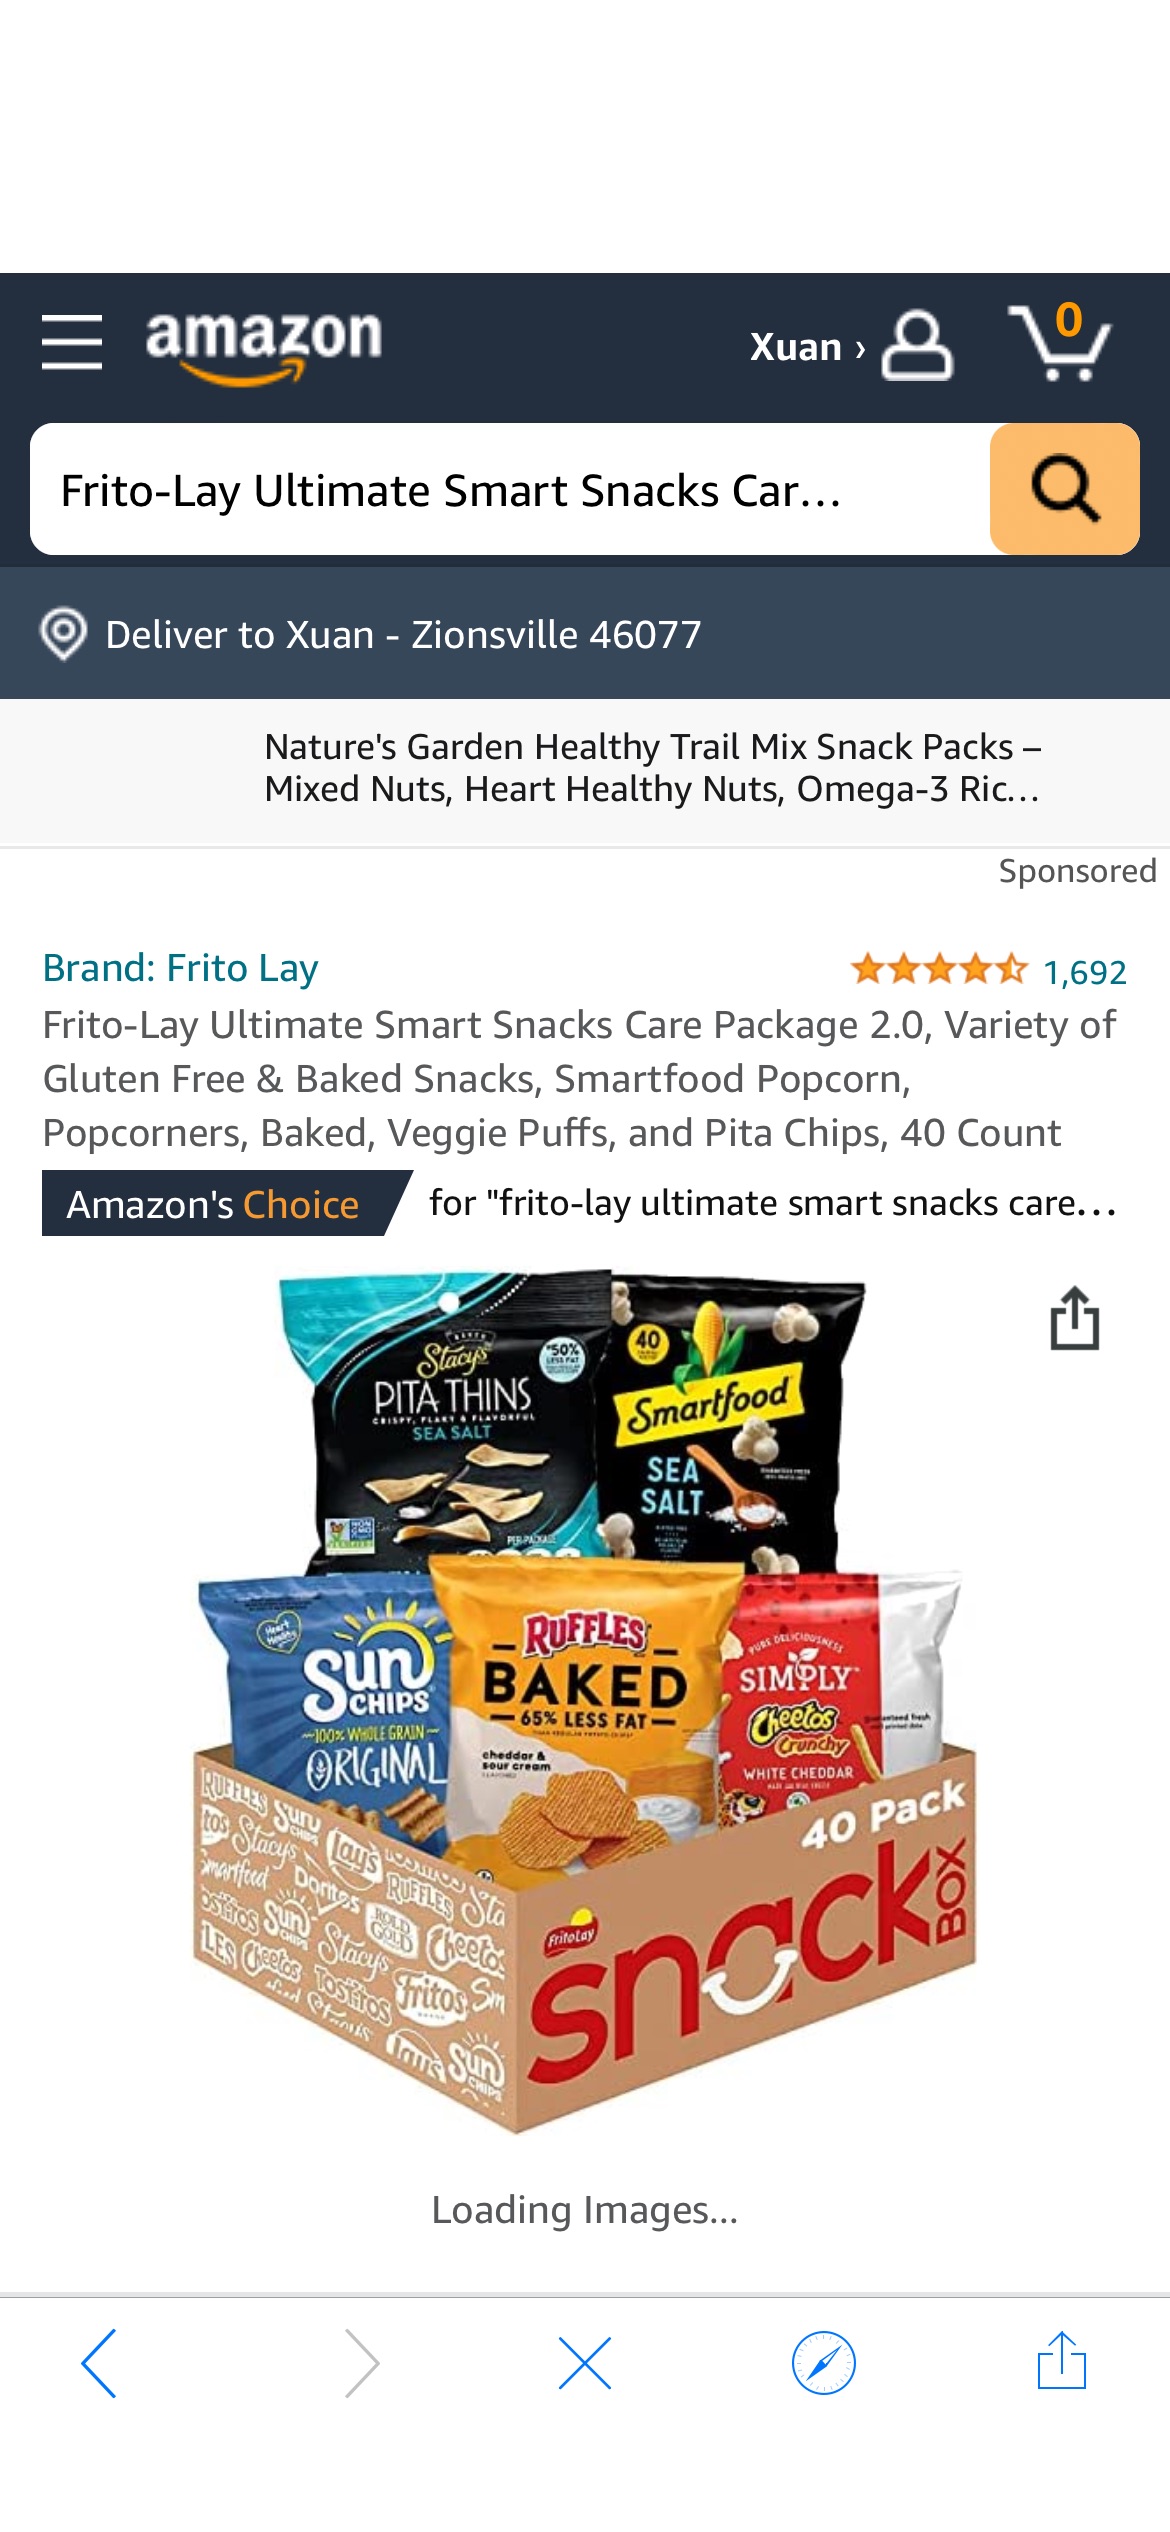 Amazon.com零食大礼包 : Frito-Lay Ultimate Smart Snacks Care Package 2.0, Variety of Gluten Free & Baked Snacks, Smartfood Popcorn, Popcorners, Baked, Veggie Puffs, and Pita Chips, 40 Count